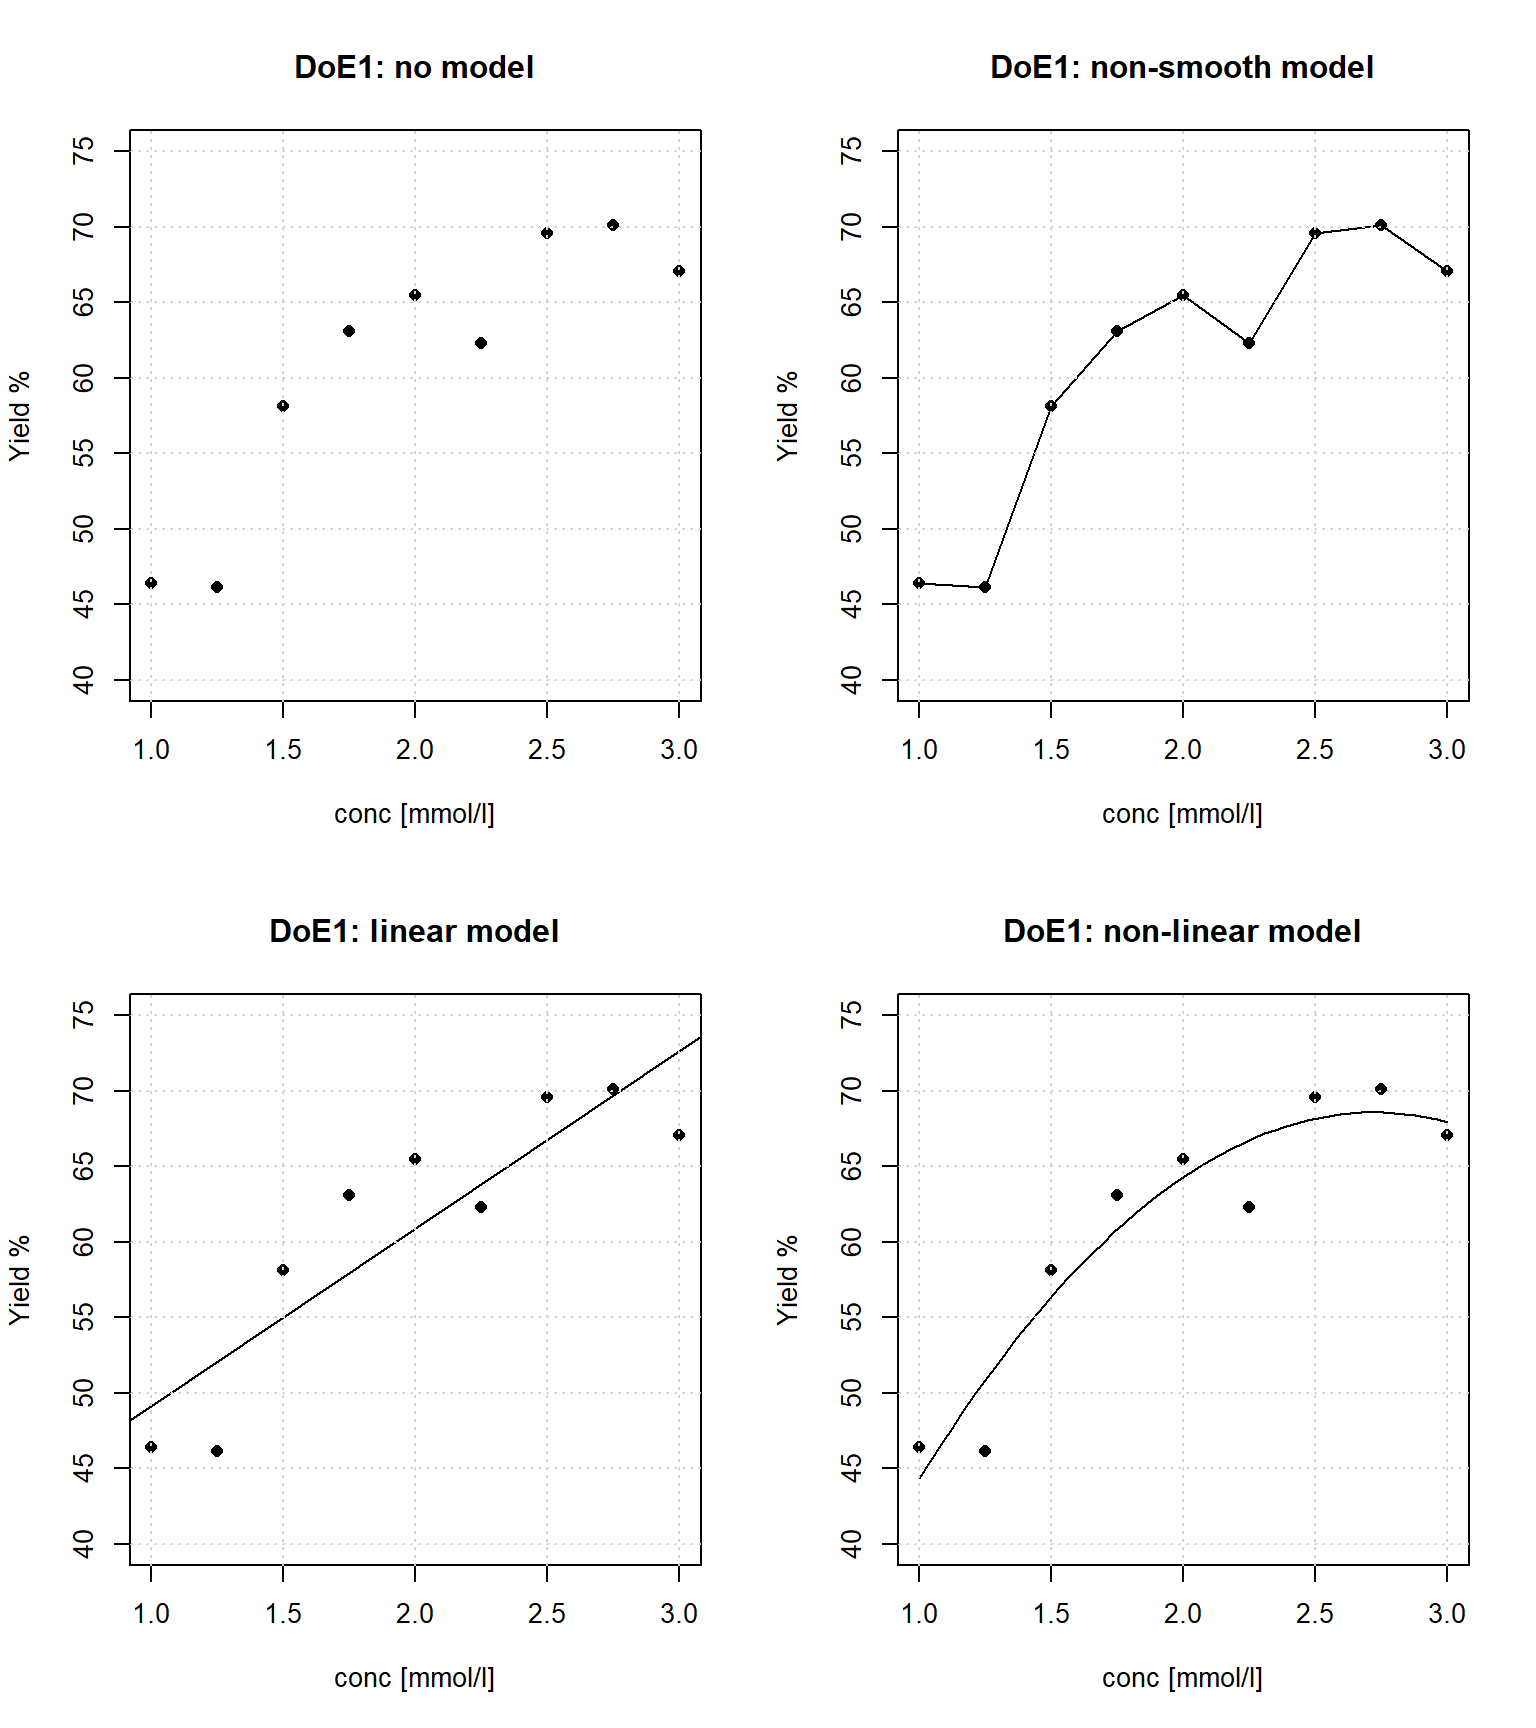 Different models (interpretations) of the data from table 3.1; DoE1